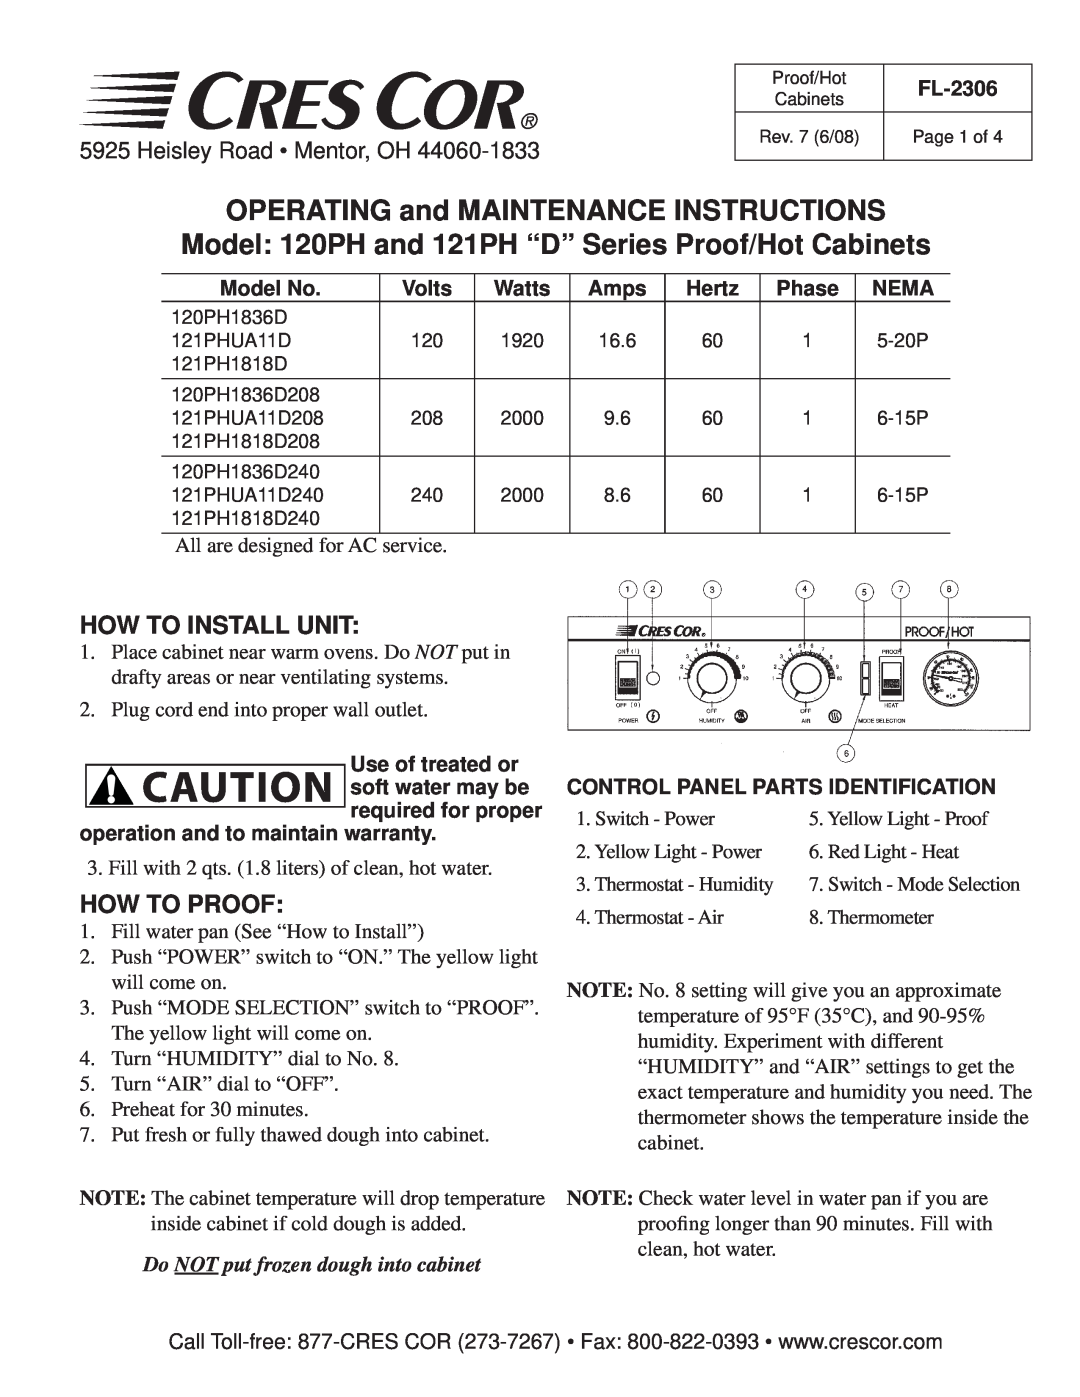 Cres Cor warranty OPERATING and MAINTENANCE INSTRUCTIONS, Model 120PH and 121PH “D” Series Proof/Hot Cabinets, FL-2306 